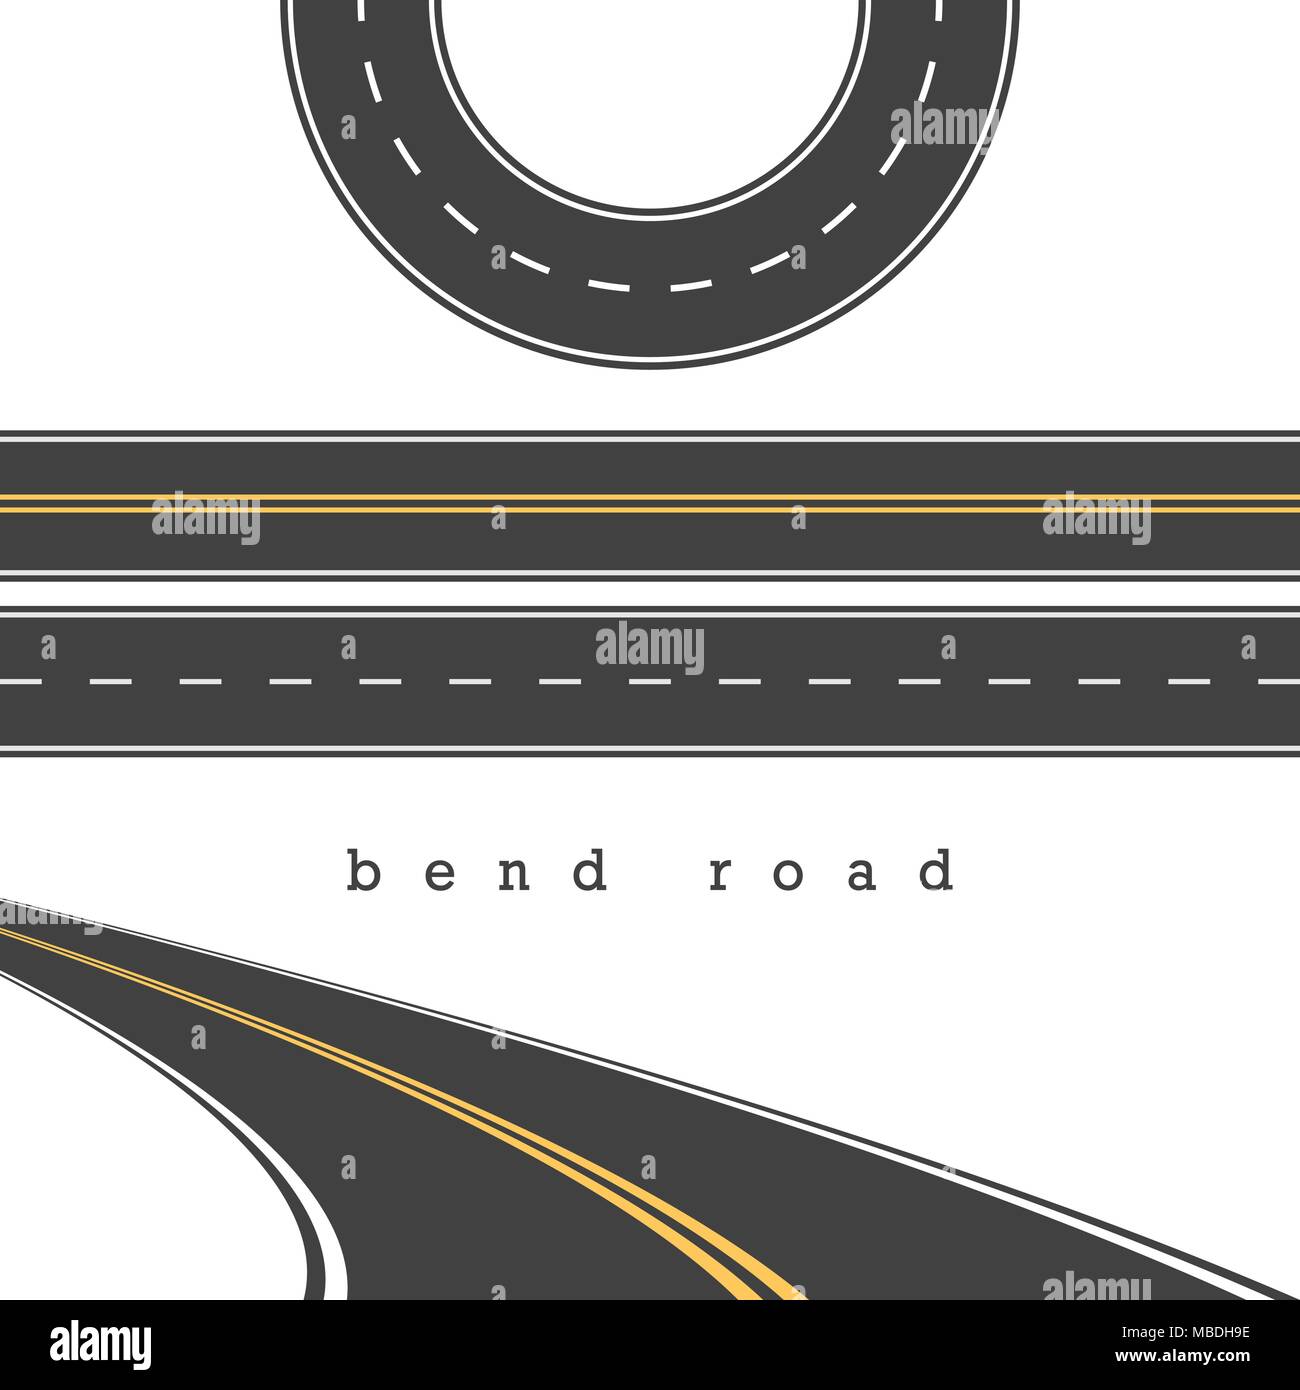 Bend Road, Straight and Curved Roads Vector Set, Road Junction. Vector Illustration. White and Yellow Road Marking Stock Vector